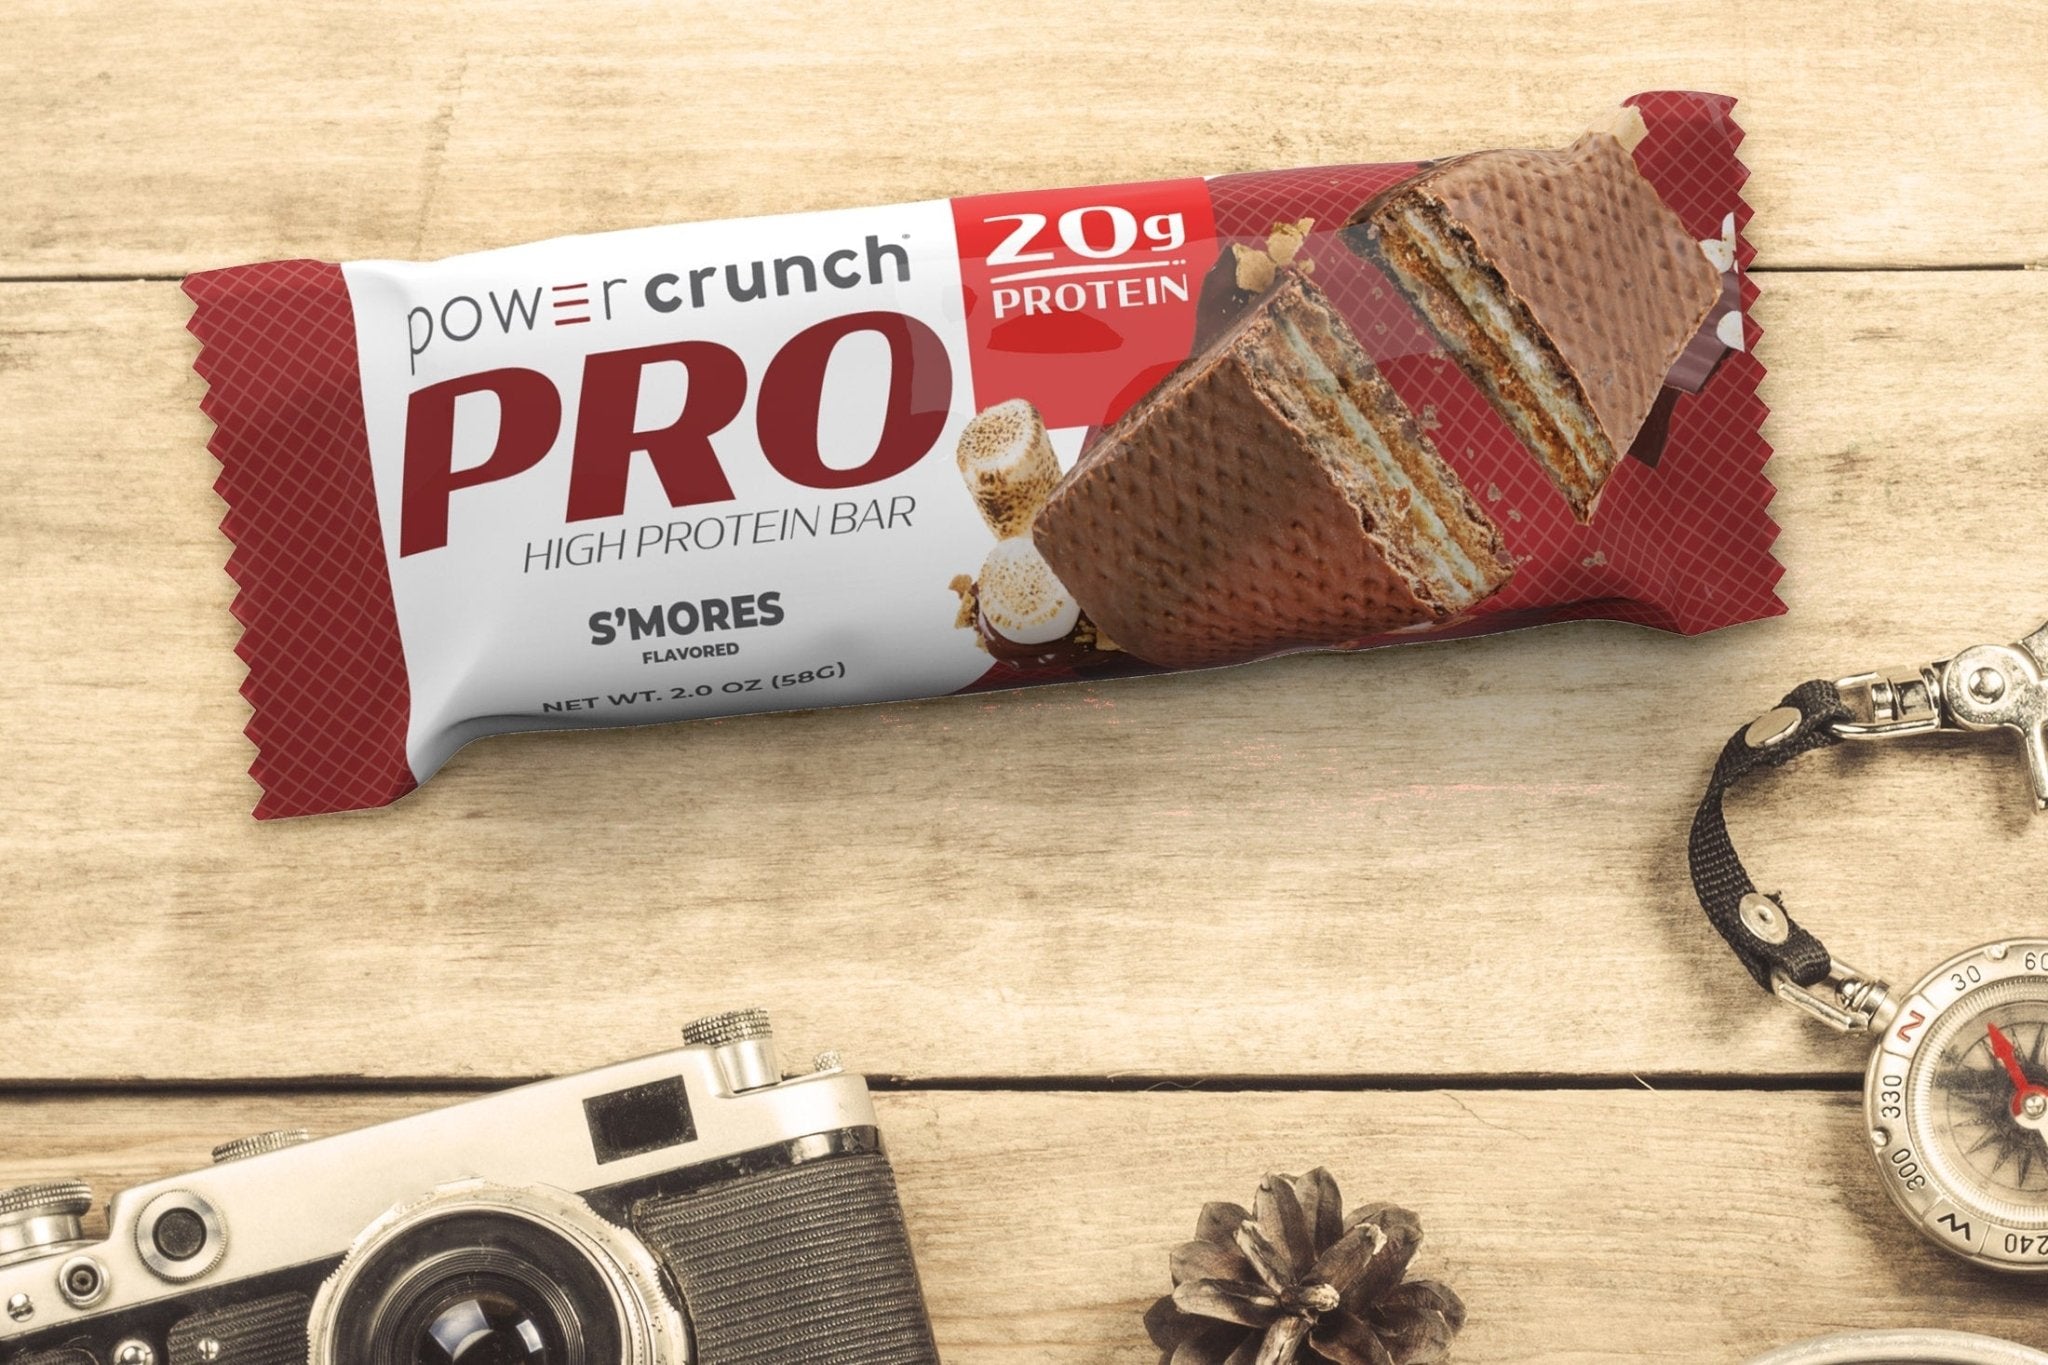 S'mores high protein bars as an on-the-go snack